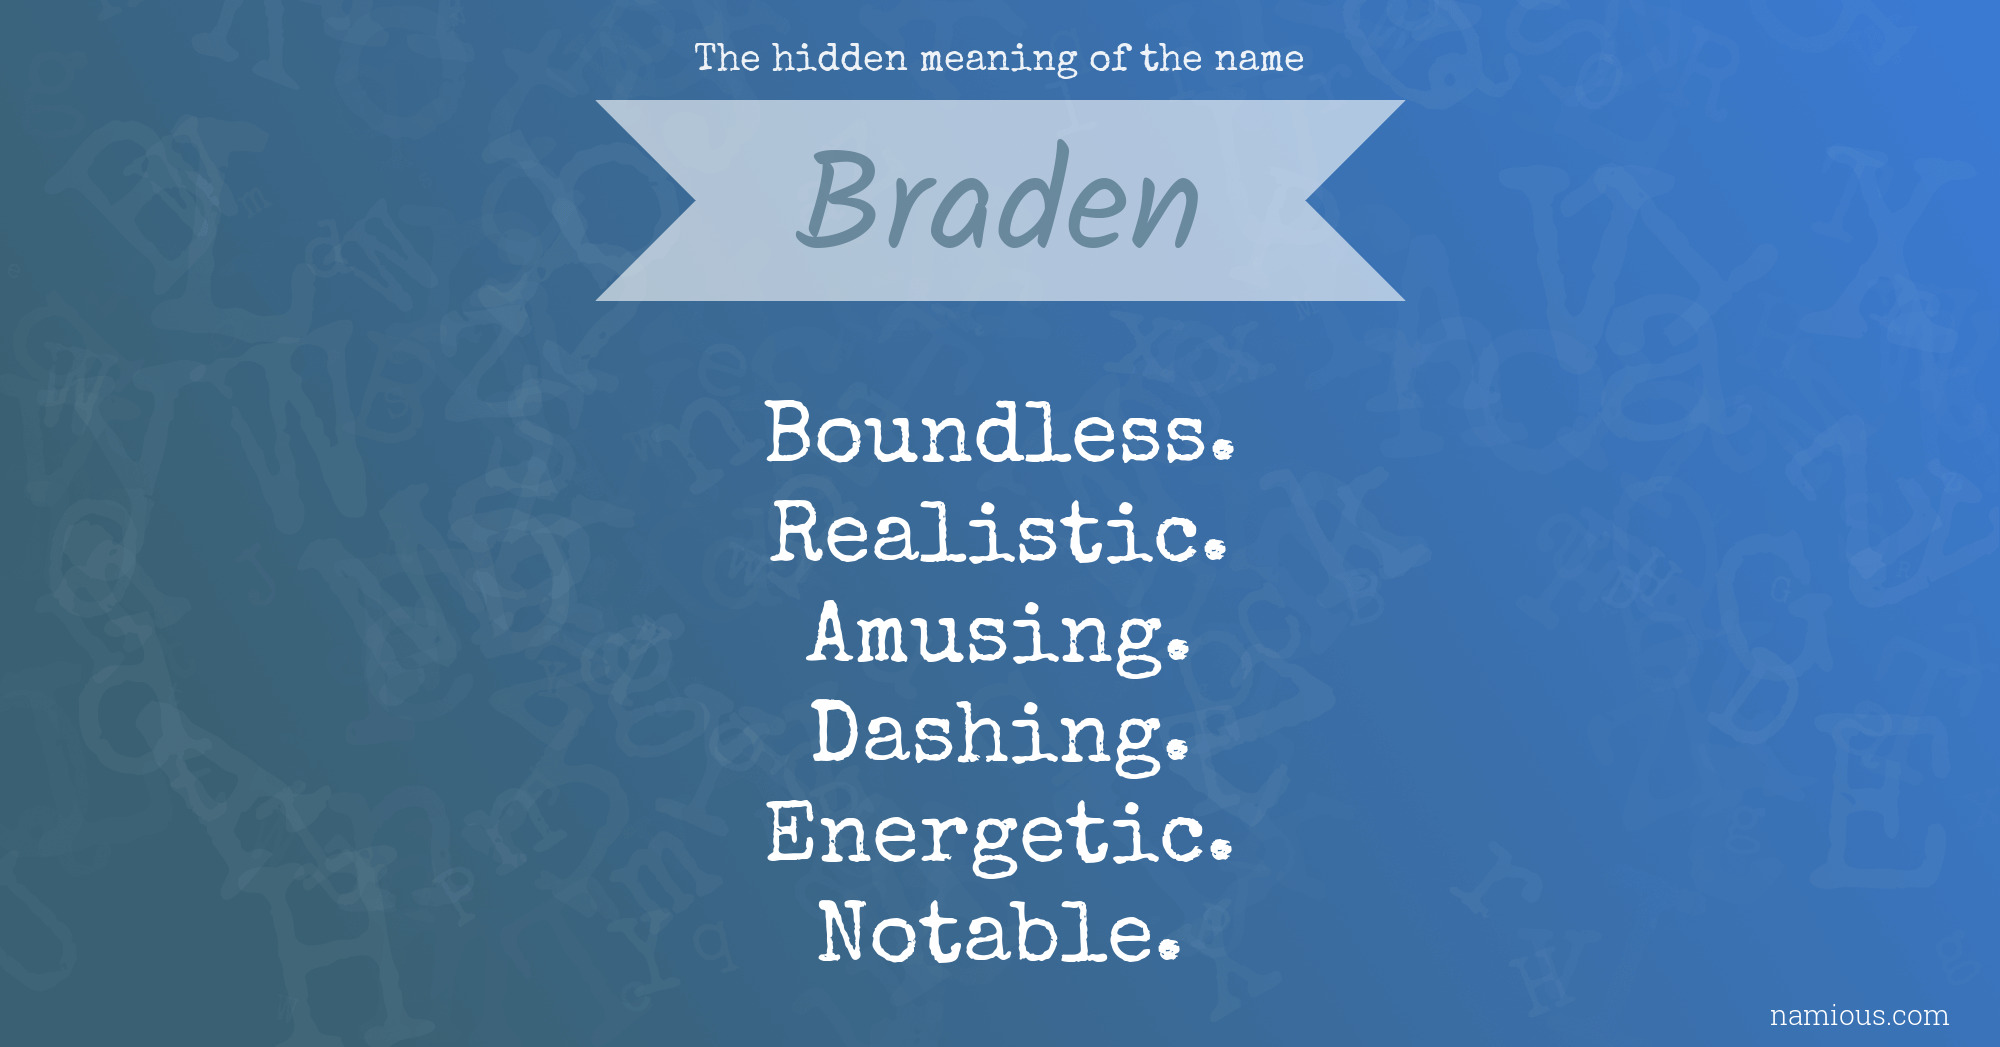 The hidden meaning of the name Braden